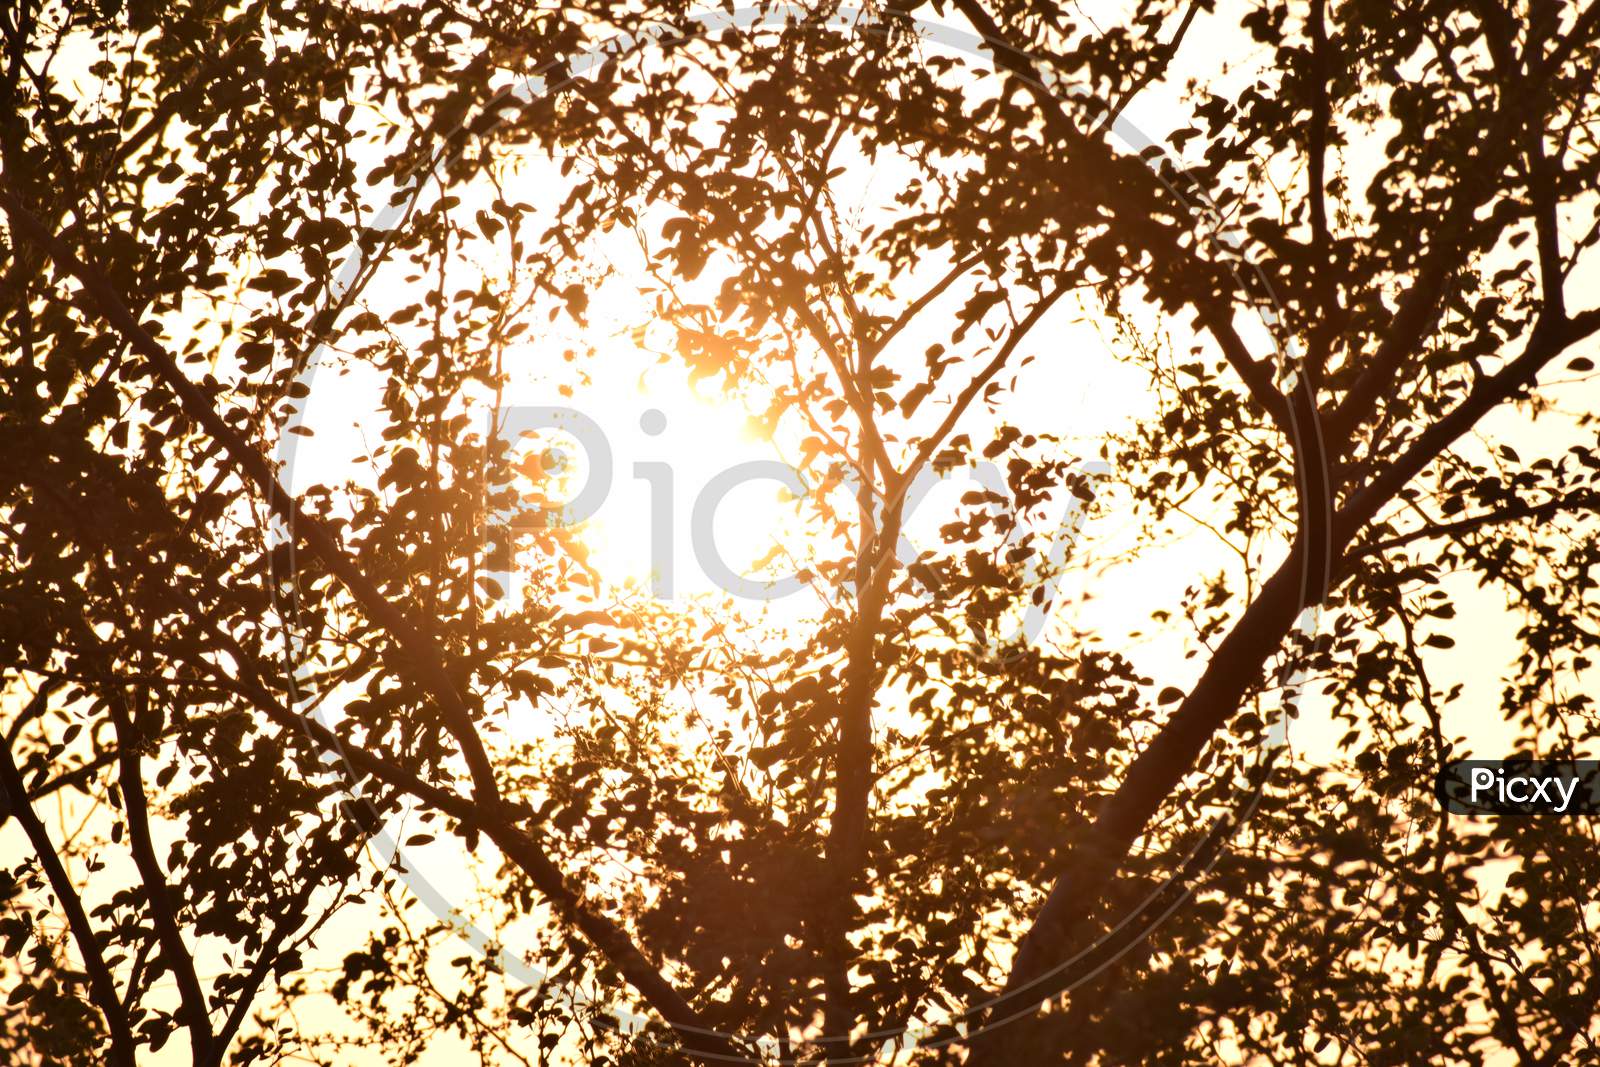 A shaded tree with sun